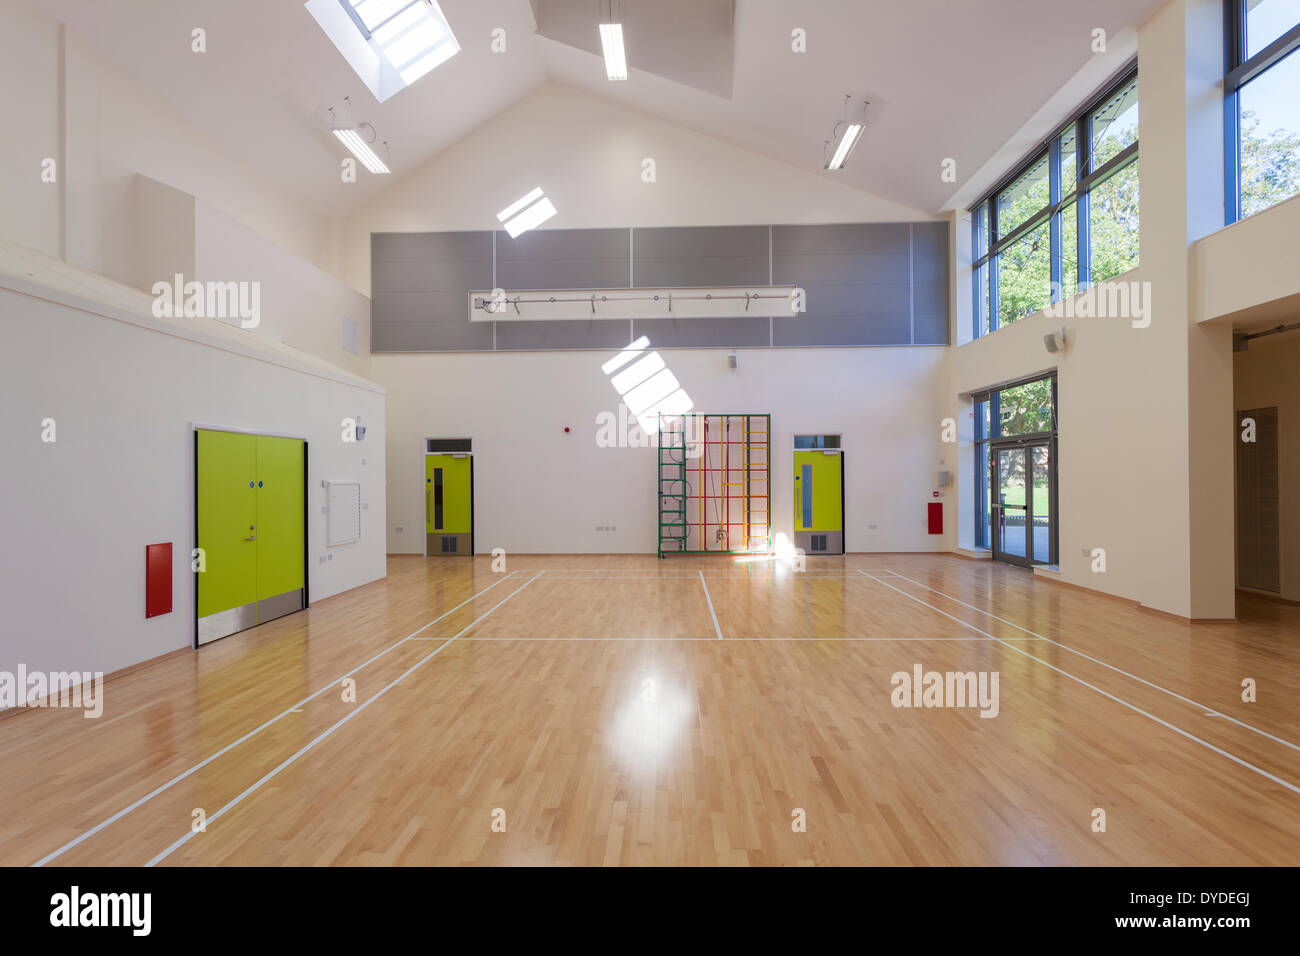 Unoccupied primary school hall with wooden floor and games markings. Stock Photo